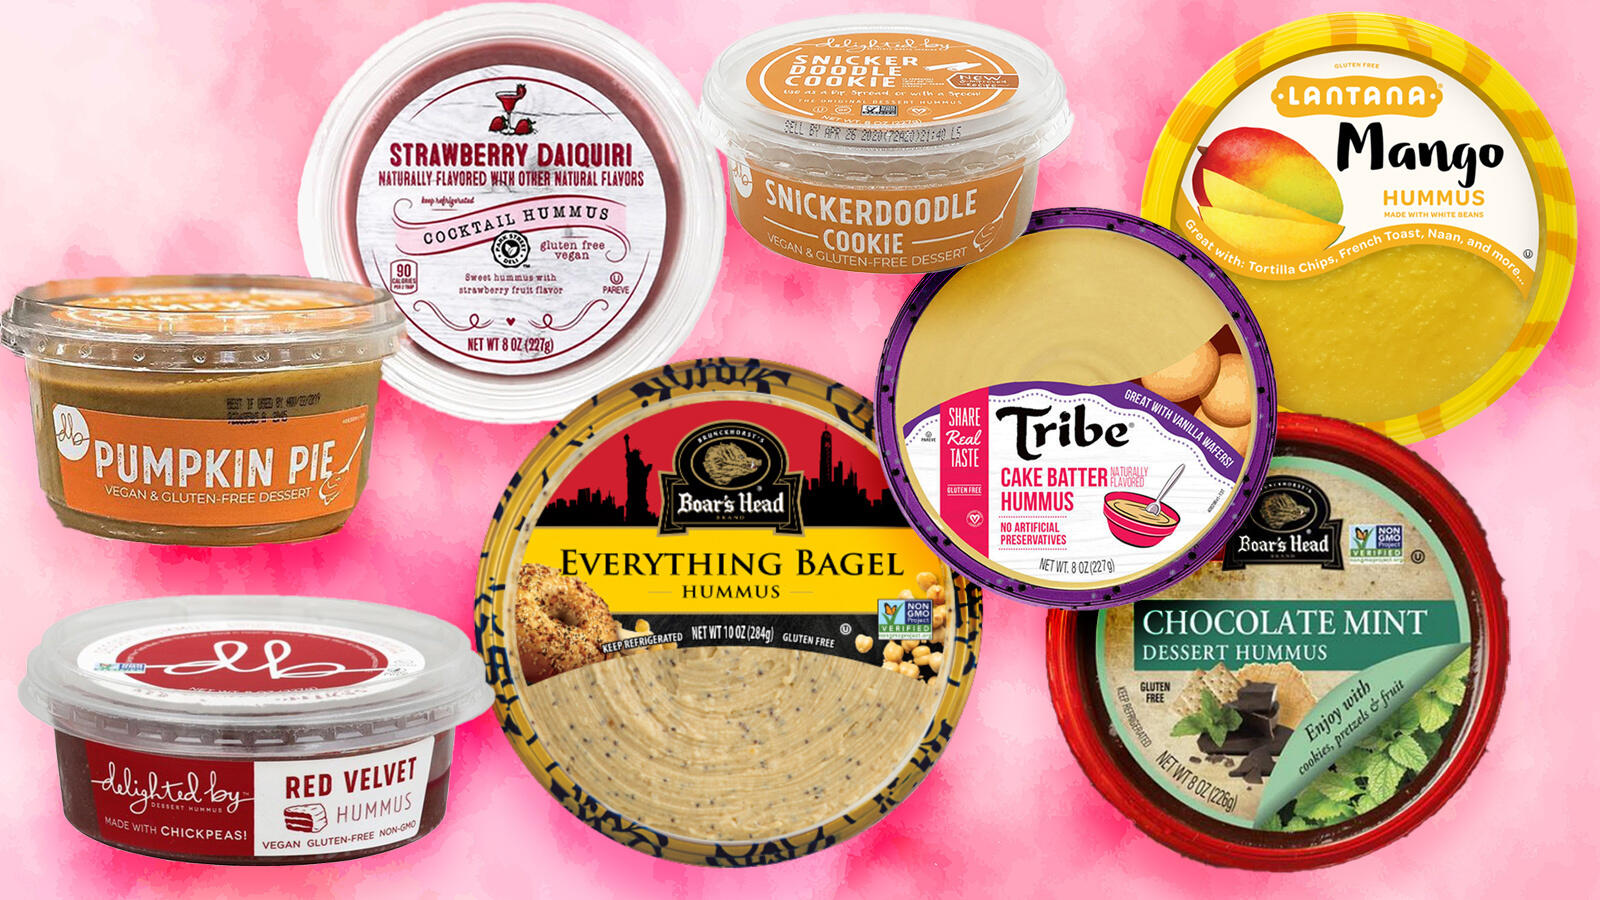 We Rounded Up the Most Horrifying Hummus Flavors We Could Find | The Nosher